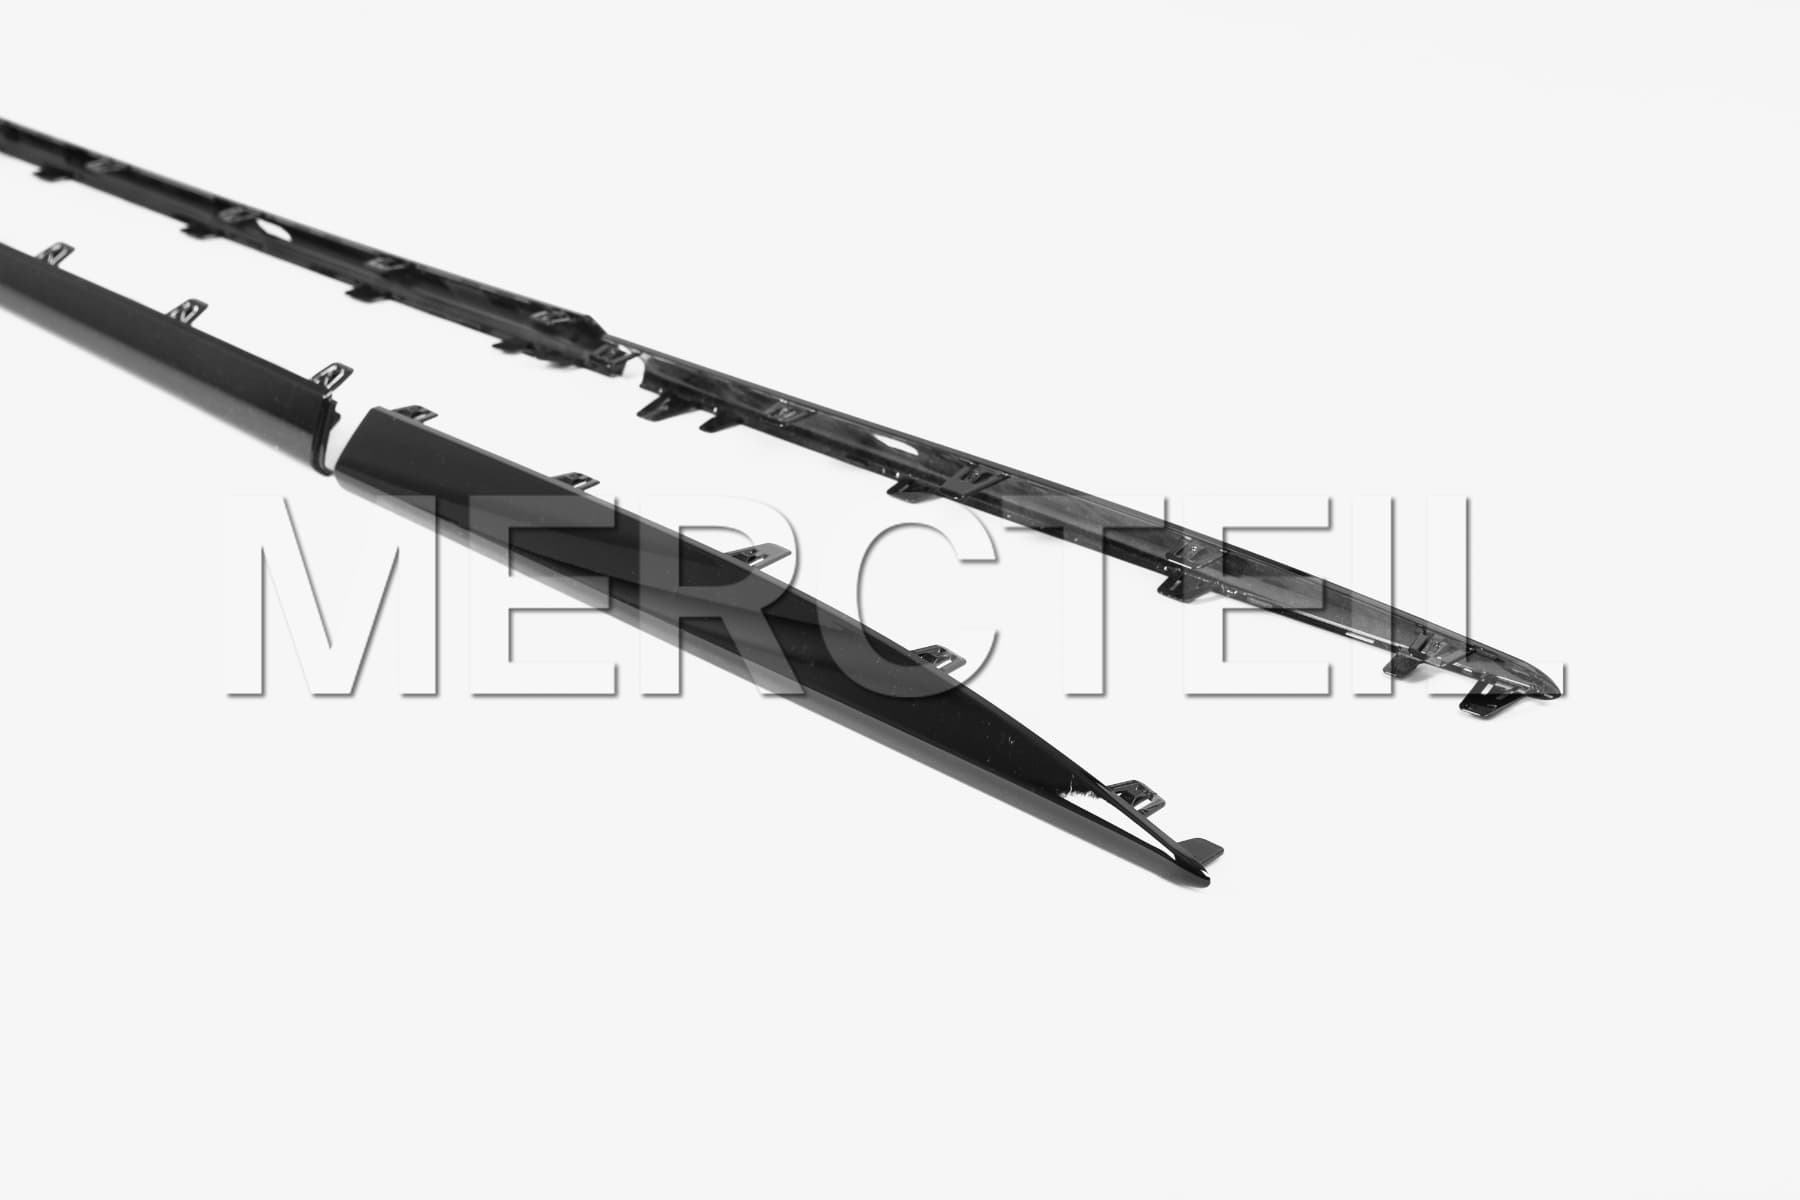 GLC63 AMG Night Package Side Skirts Molding Kit for GLC Class C/X253 Genuine Mercedes-AMG (Part number: A2536986300)